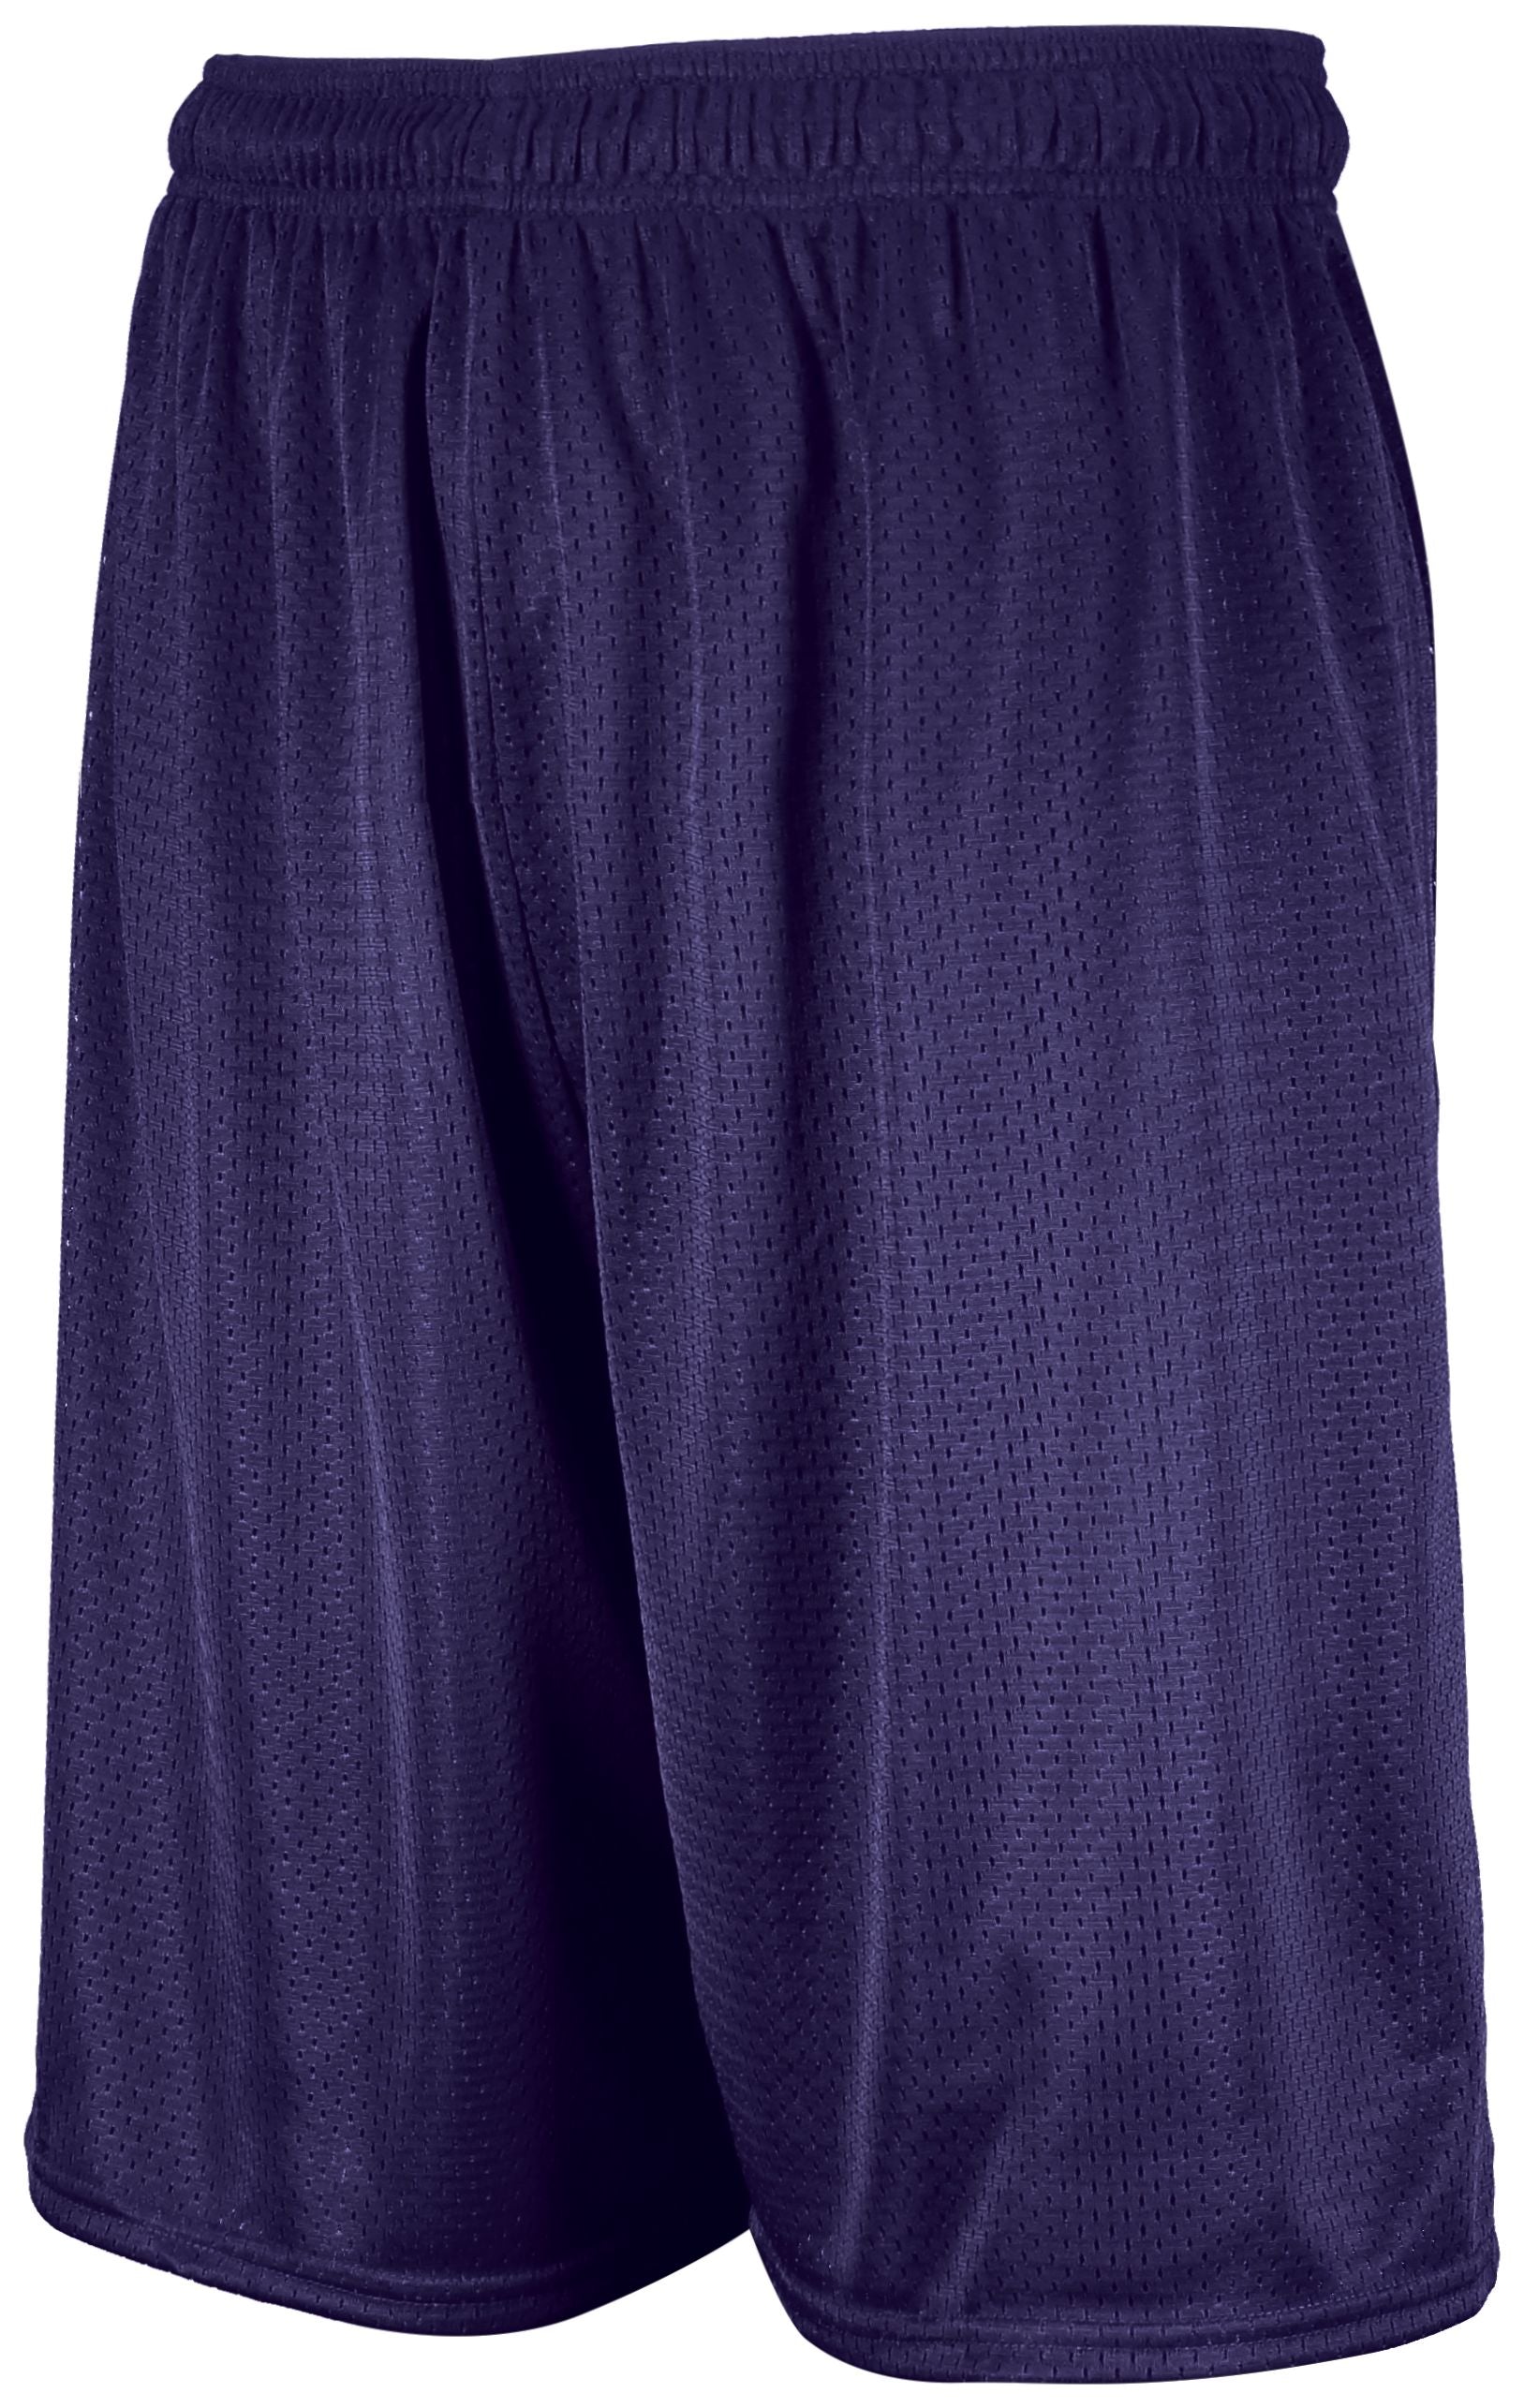 Russell Athletic Youth Dri-Power Mesh Shorts in Purple  -Part of the Youth, Youth-Shorts, Russell-Athletic-Products product lines at KanaleyCreations.com